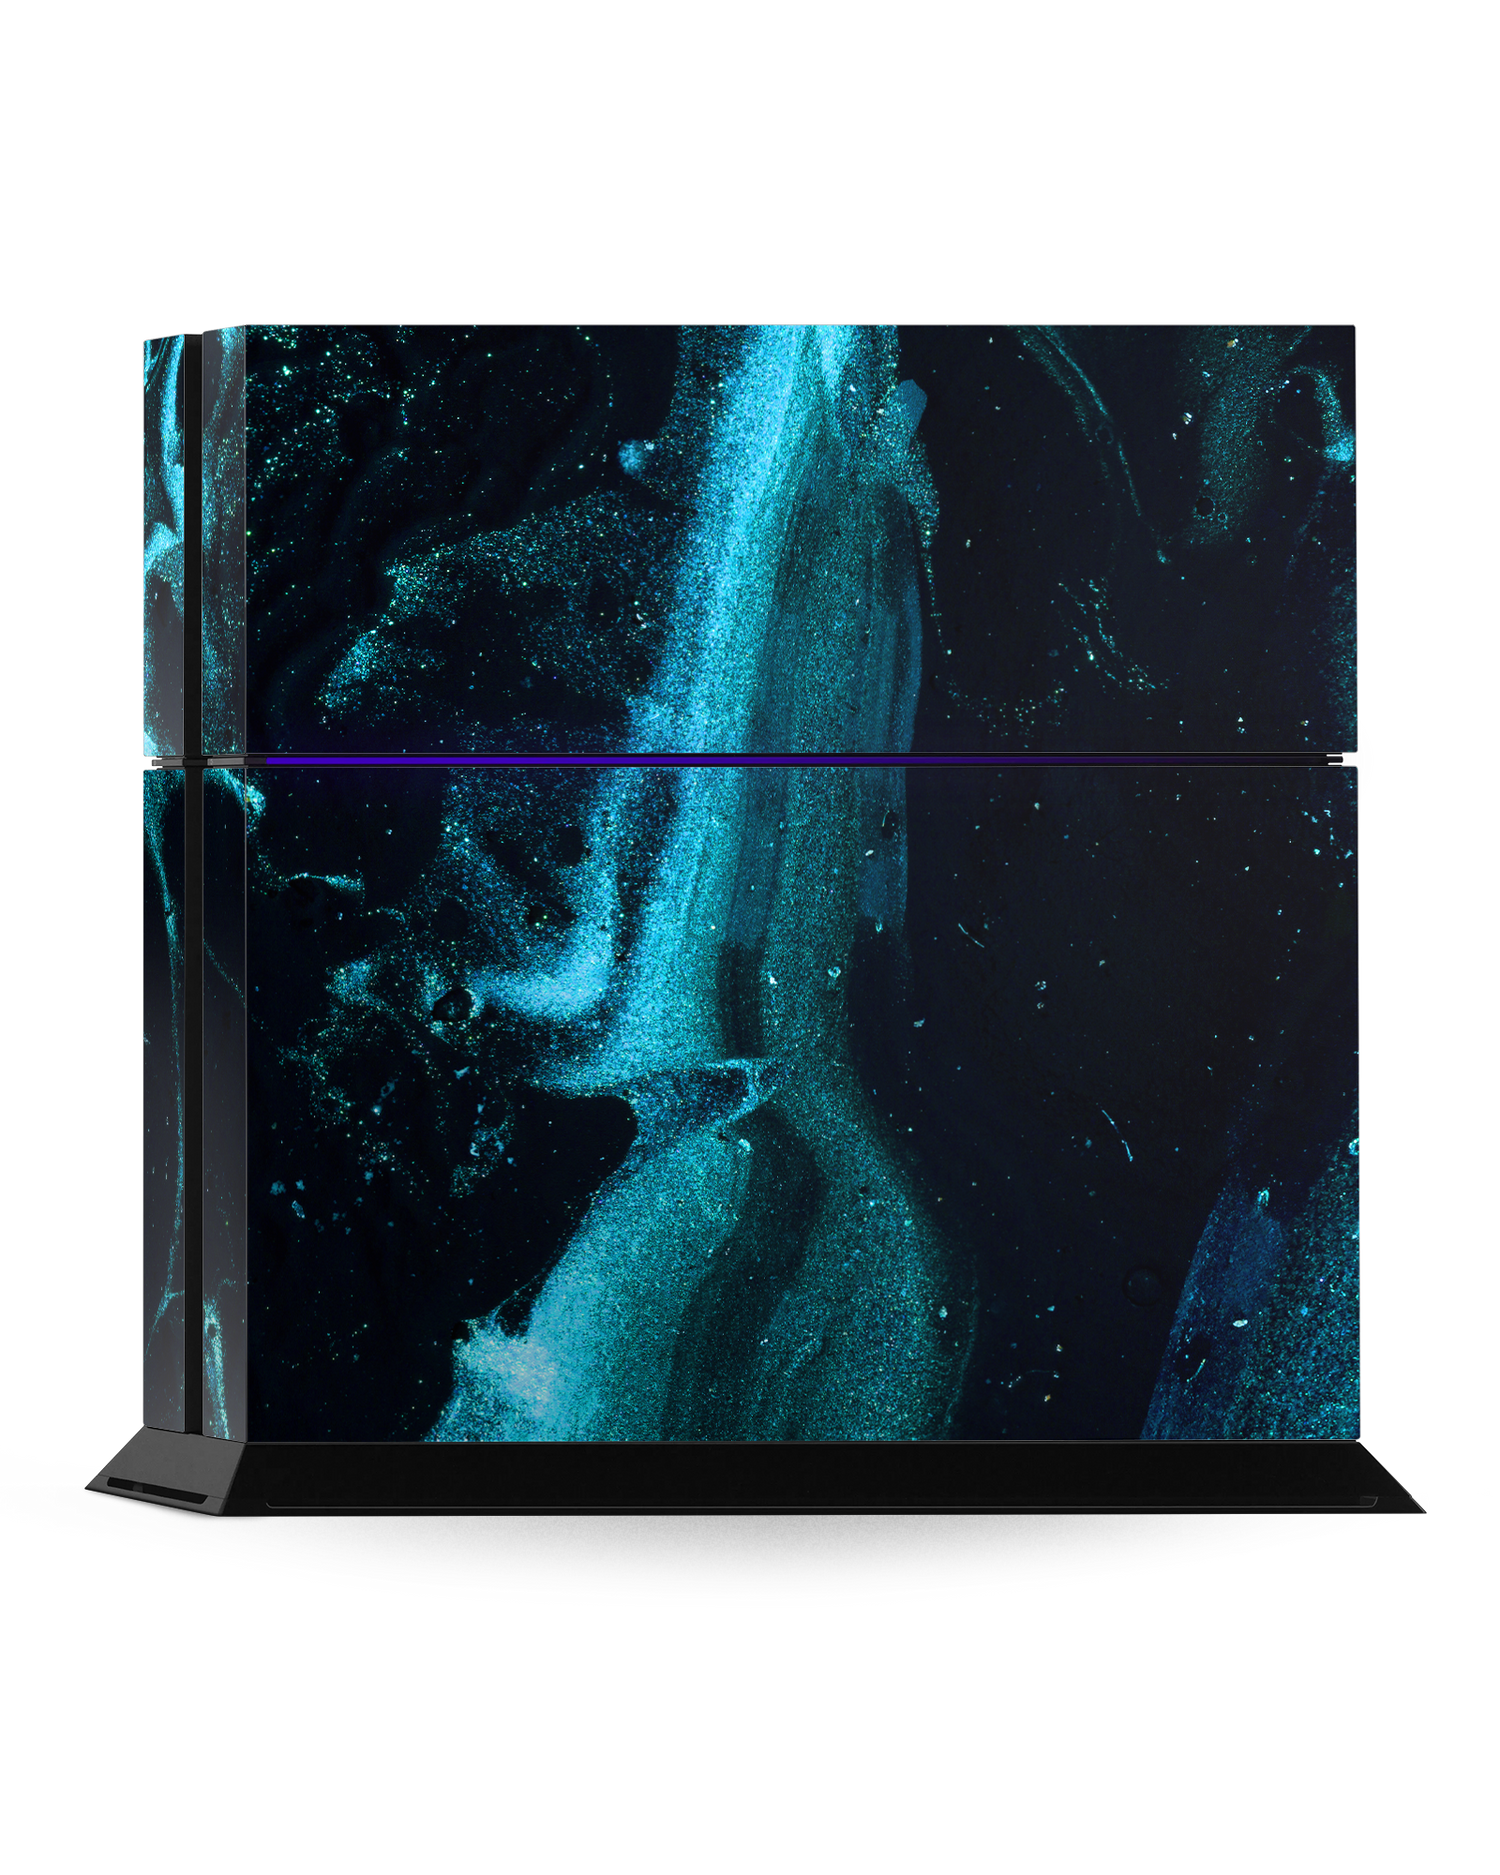 Deep Turquoise Sparkle Console Skin for Sony PlayStation 4: Standing